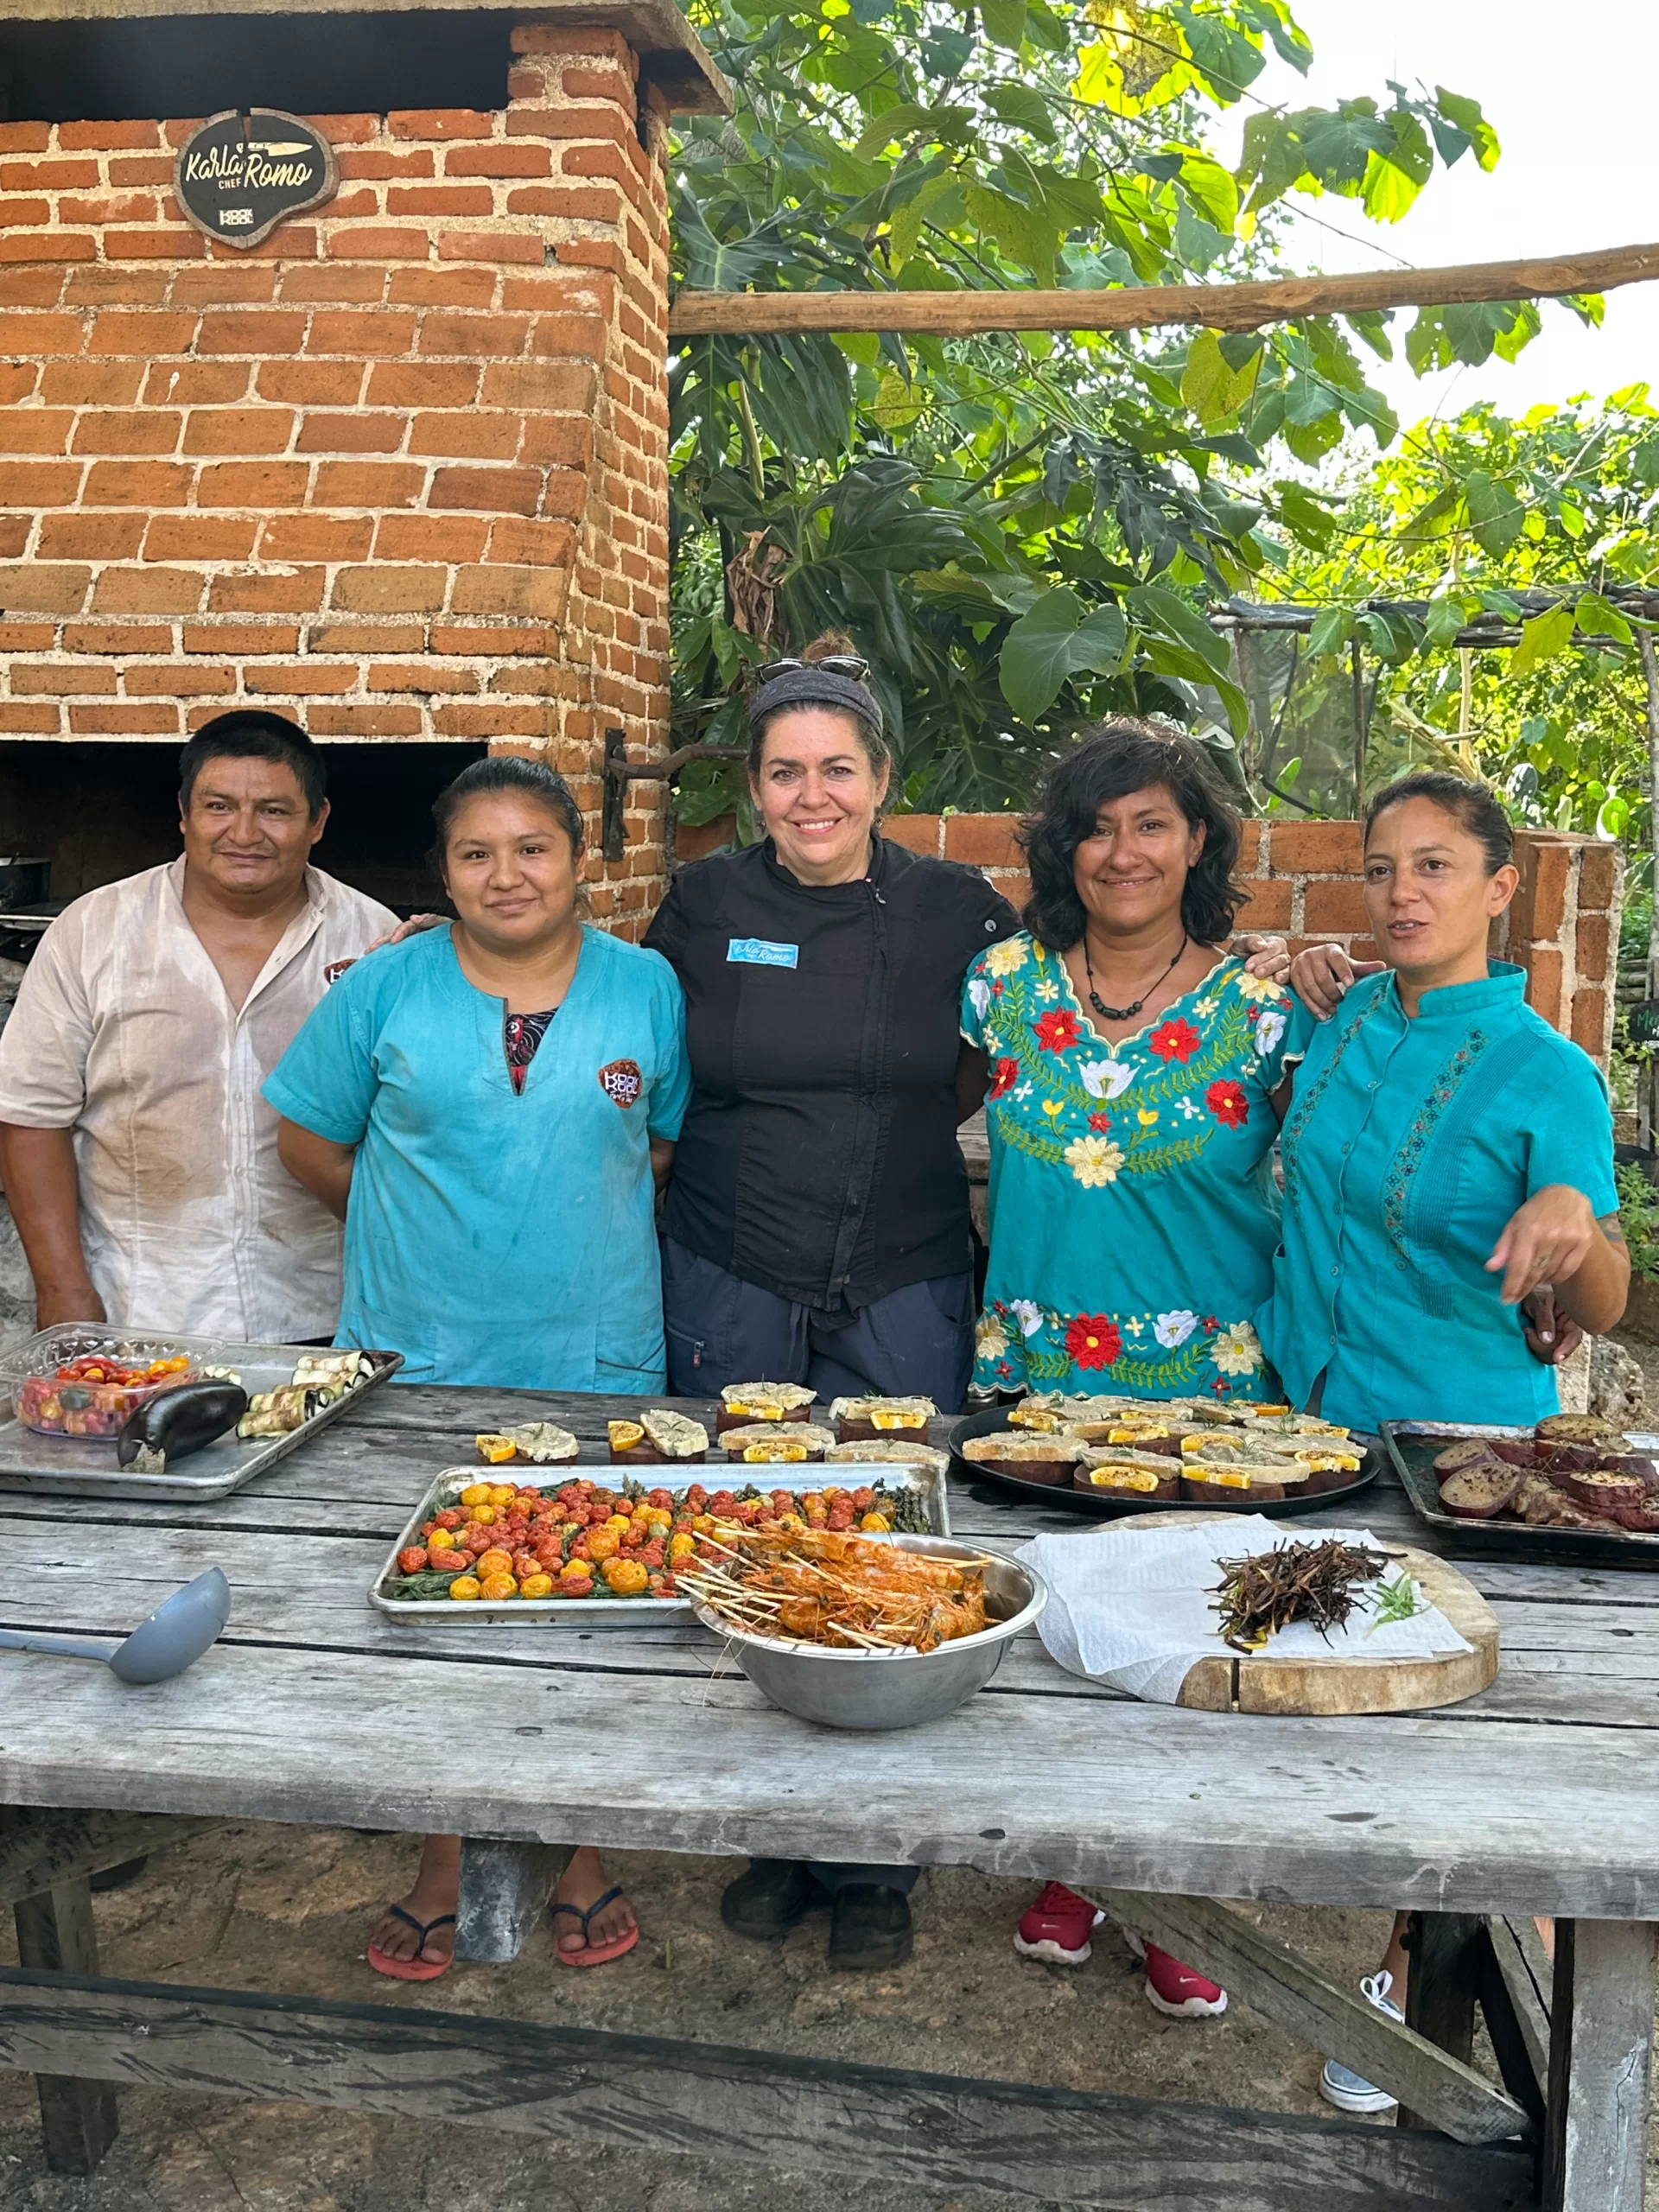 Chef Karla Romo and three women and one man on her team at KIK.